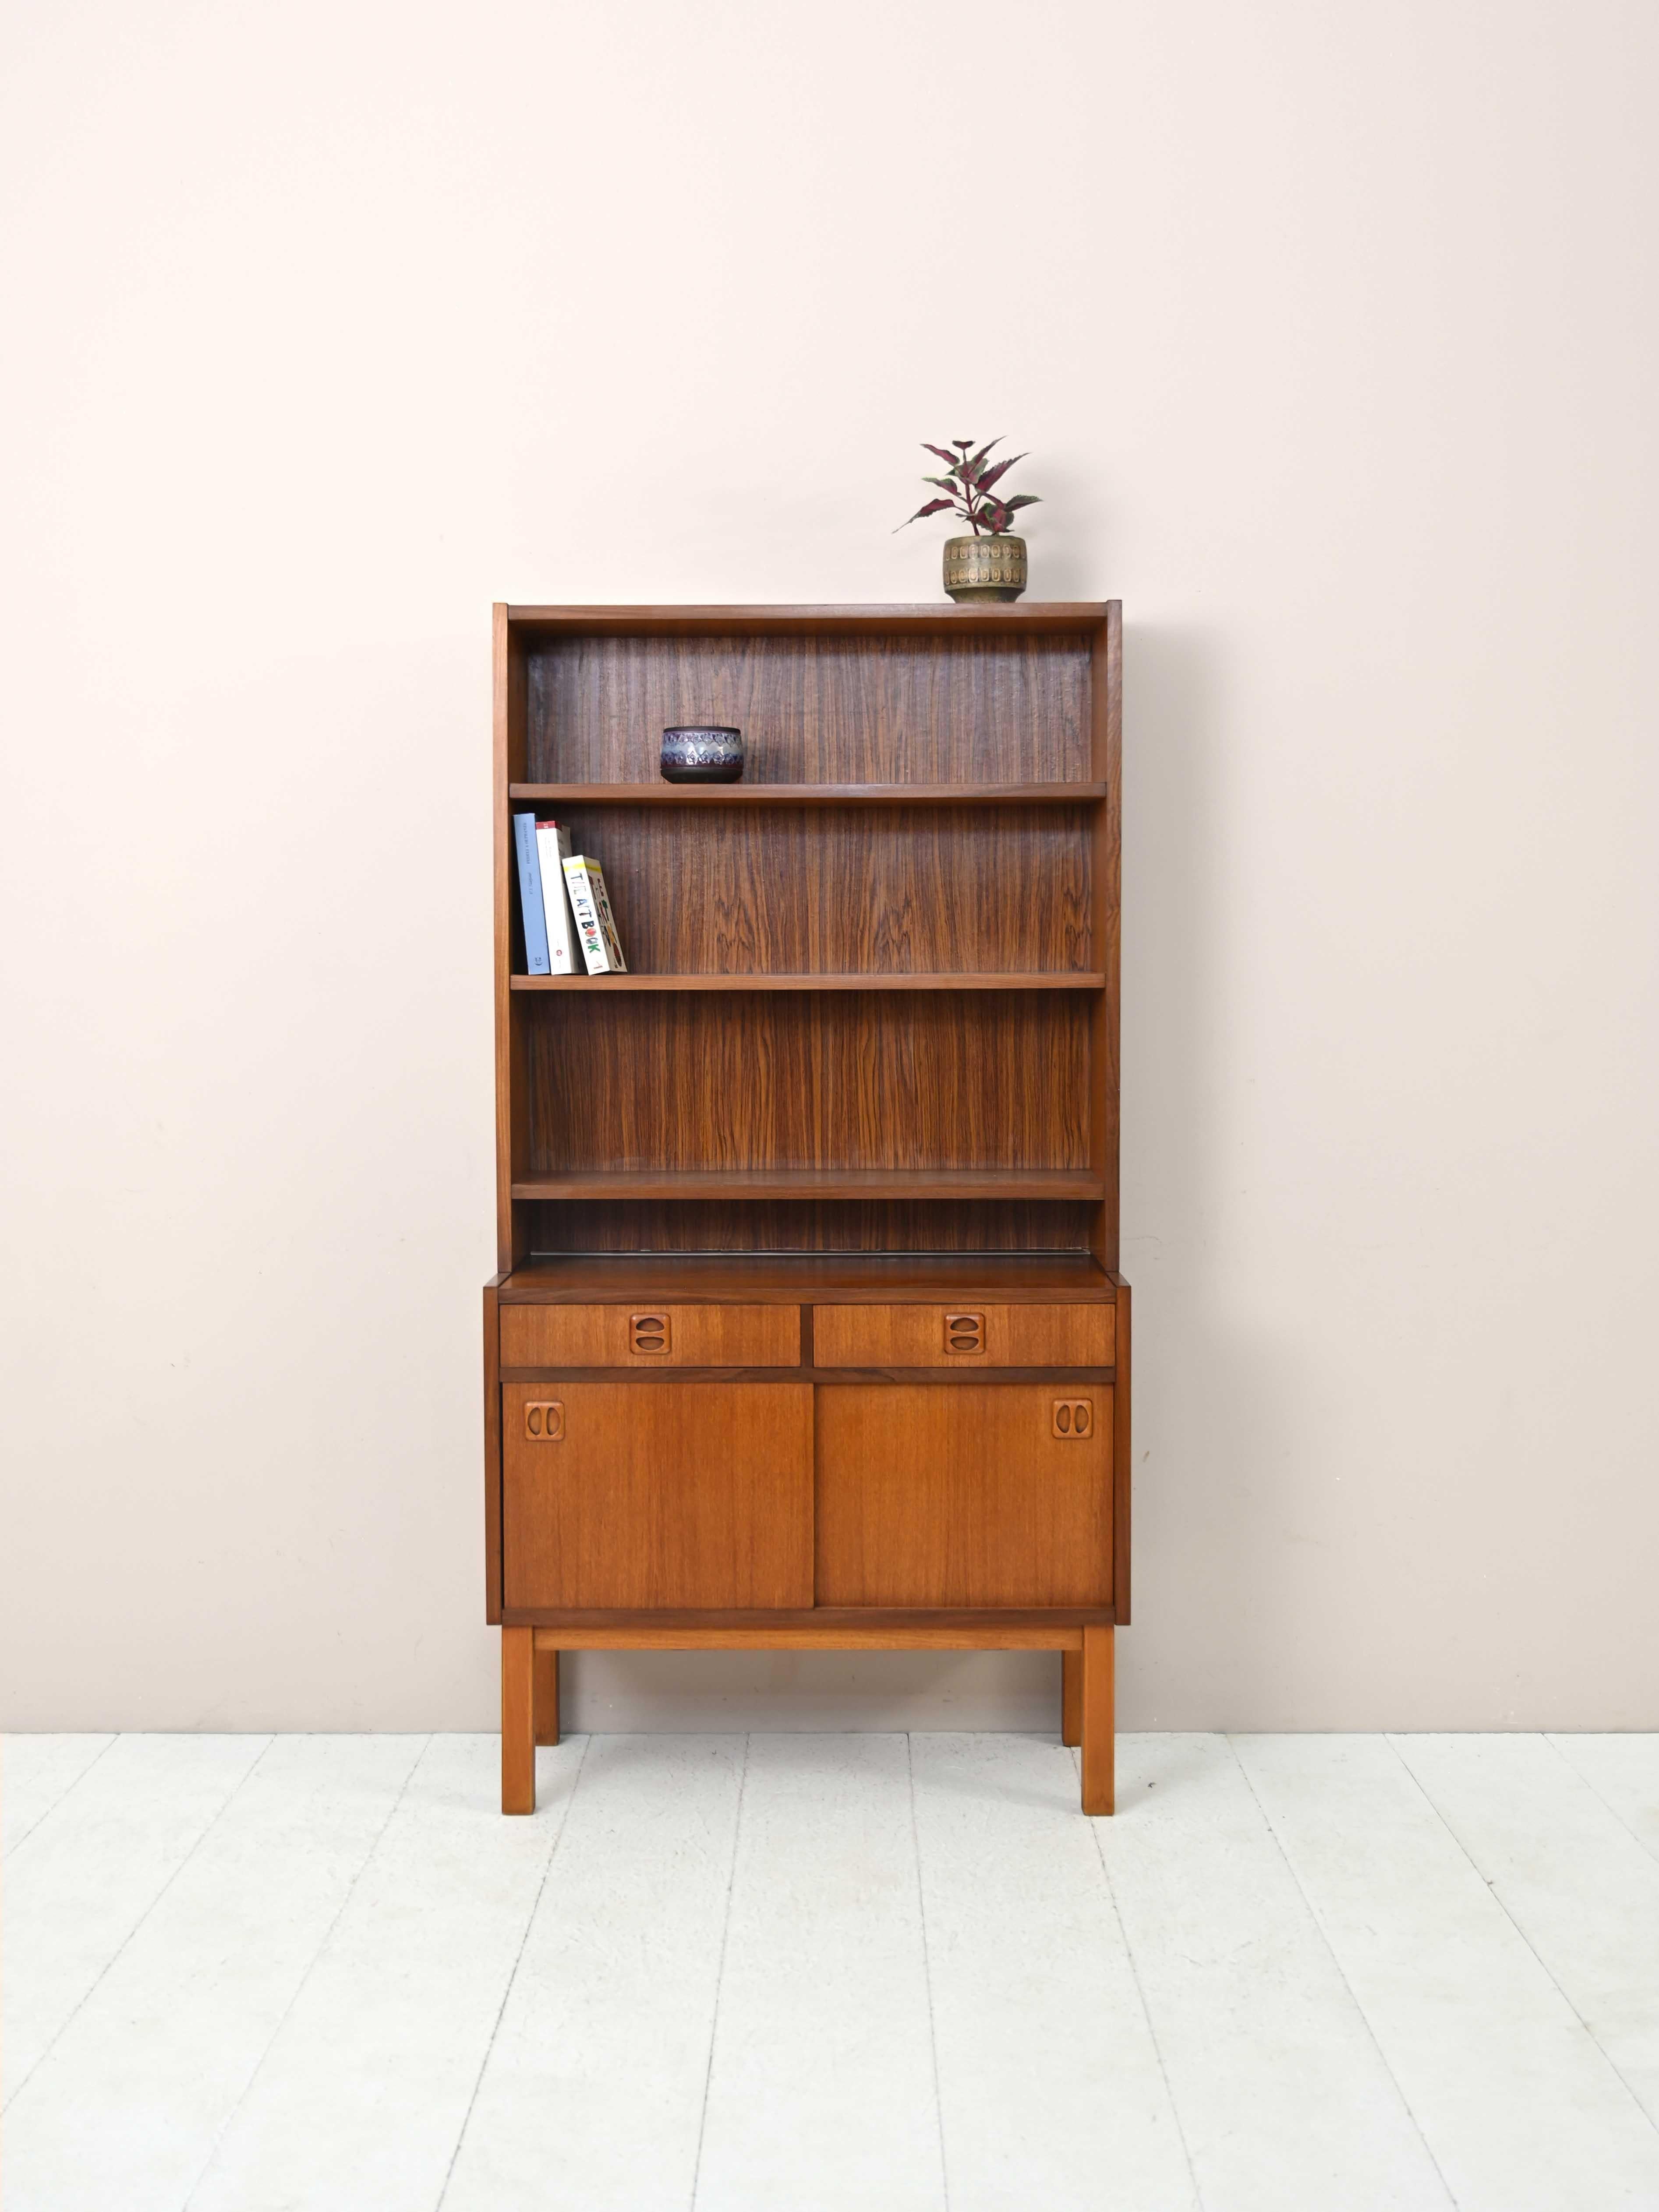 Scandinavian cabinet with shelving.

A practical and original bookcase consisting of a cabinet with sliding doors and two drawers and an adjustable-height shelving system.
The unmistakable features of the Bodafors company's furniture can be found in